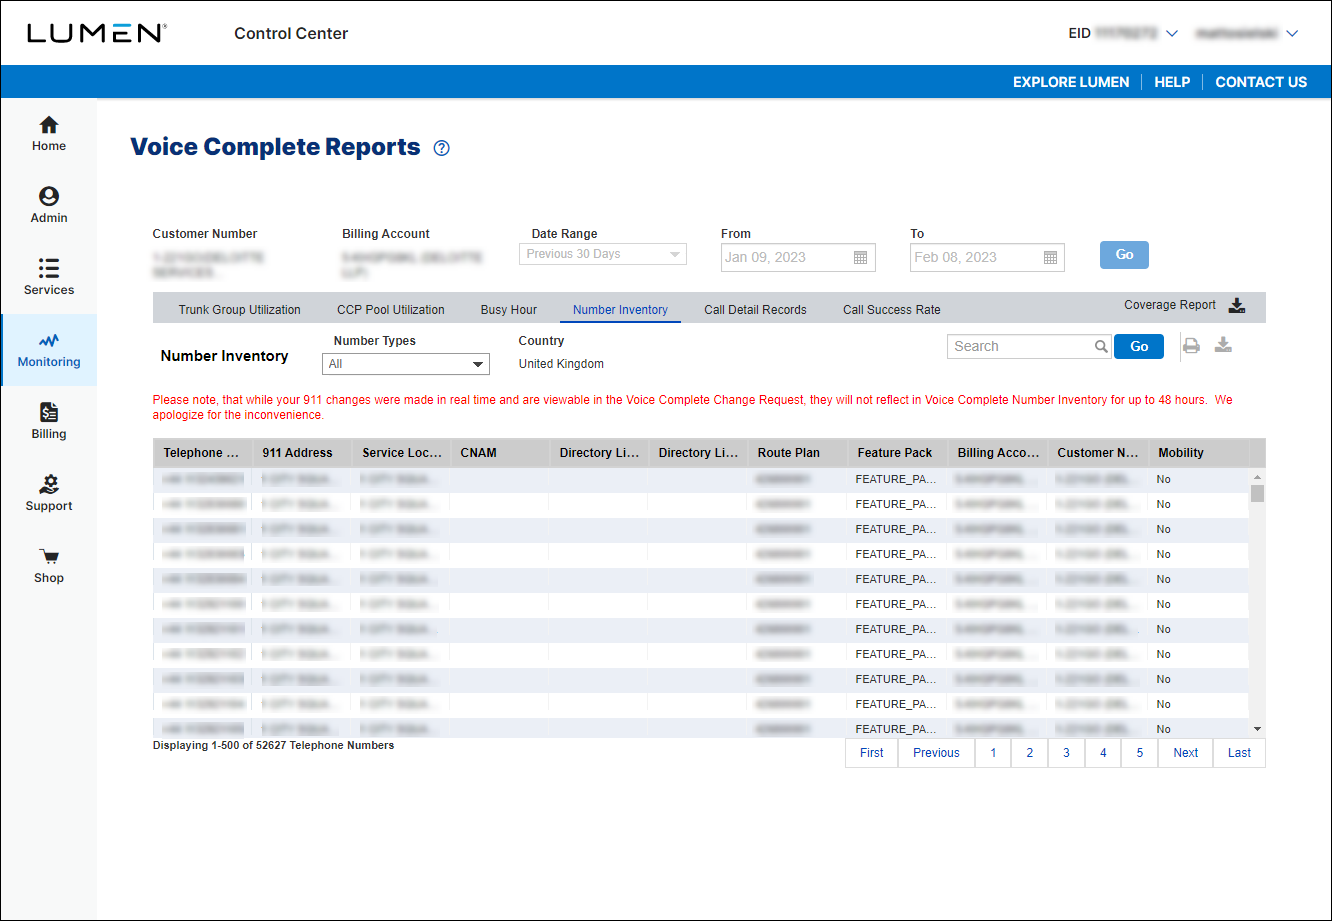 Voice Complete Reports (showing Number Inventory)